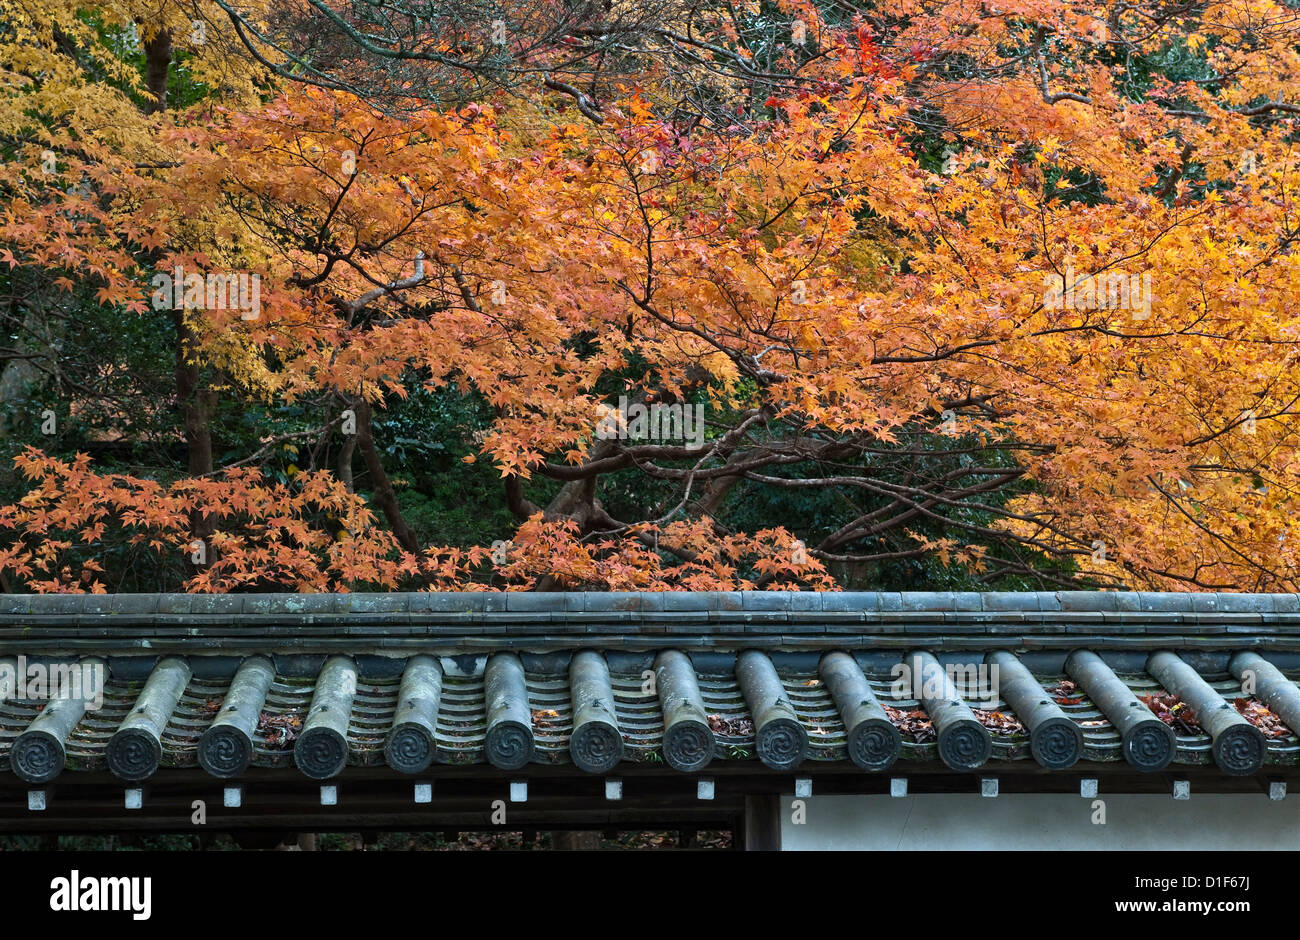 Japanese maples in their golden autumn foliage above a traditional clay tiled roof at the Buddhist temple of Nanzen-ji, Kyoto, Japan Stock Photo